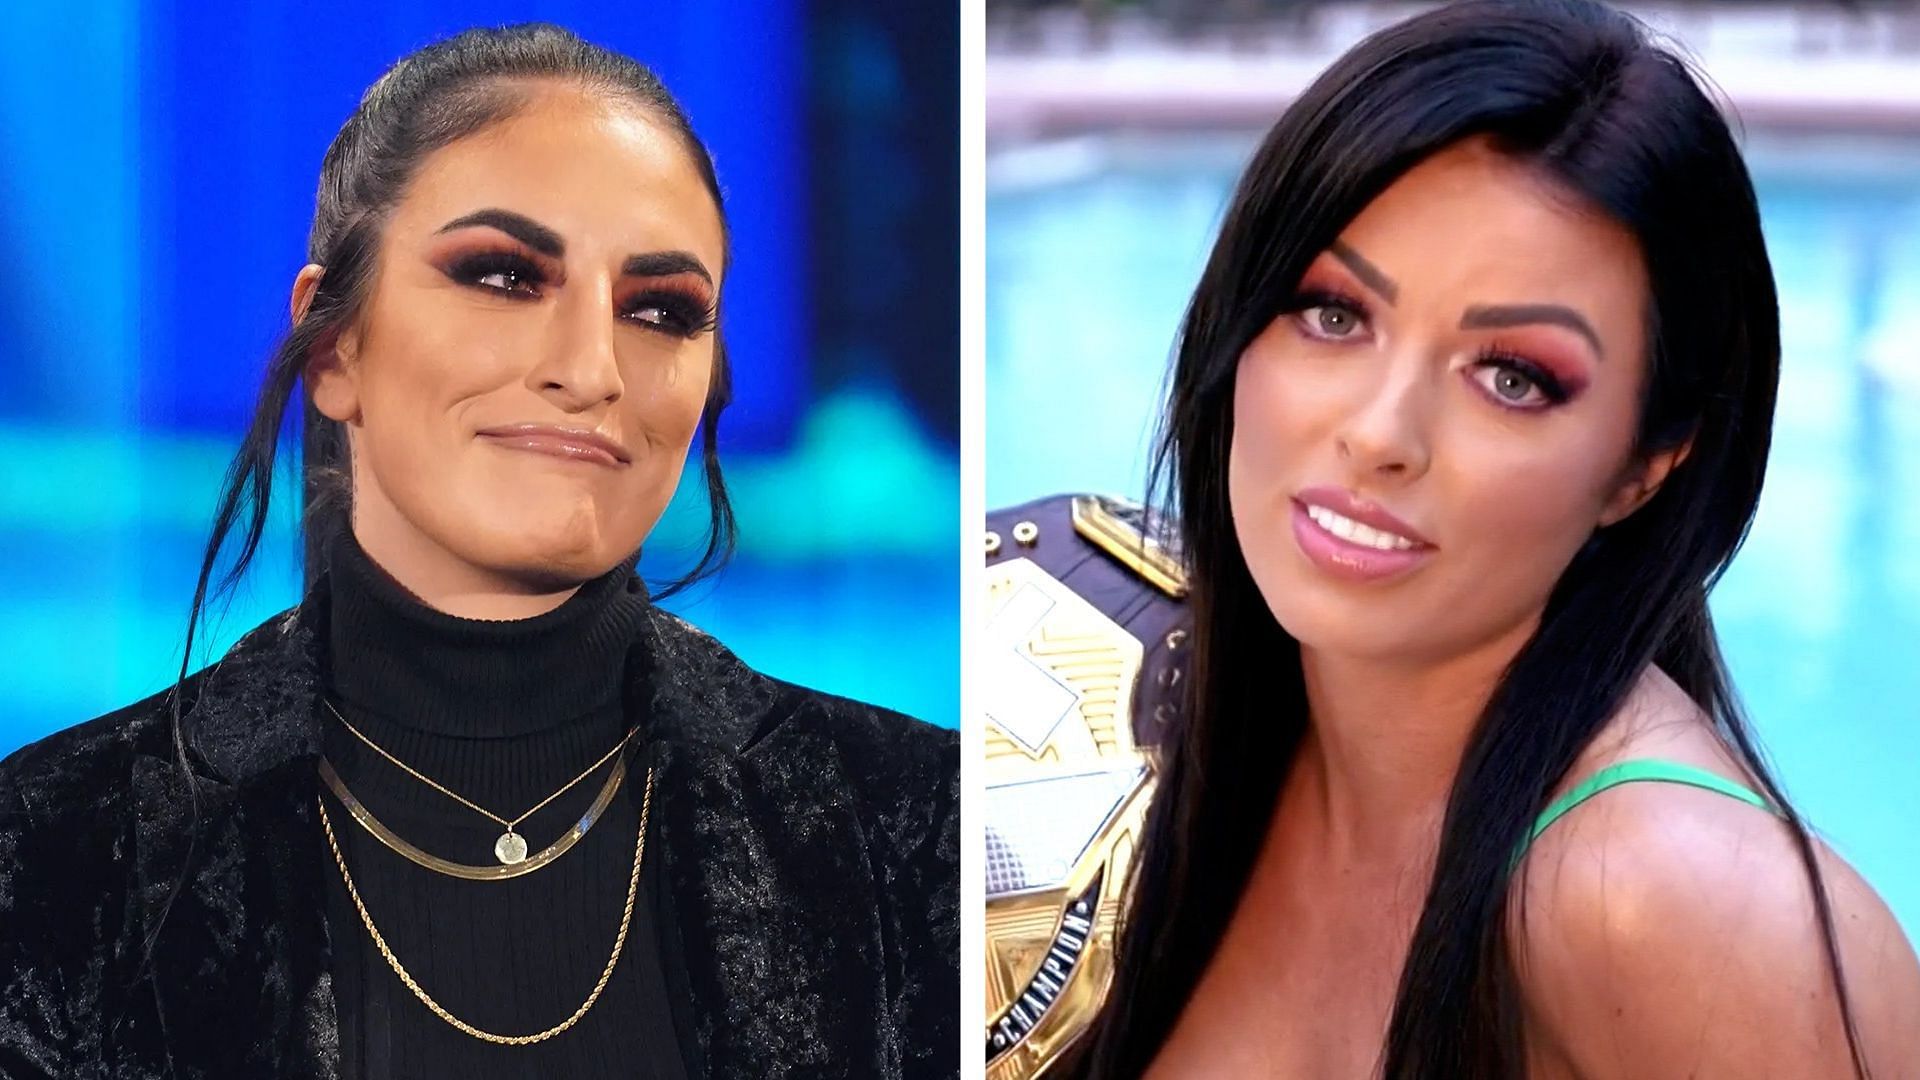 Sonya Deville could potentially join Toxic Attraction